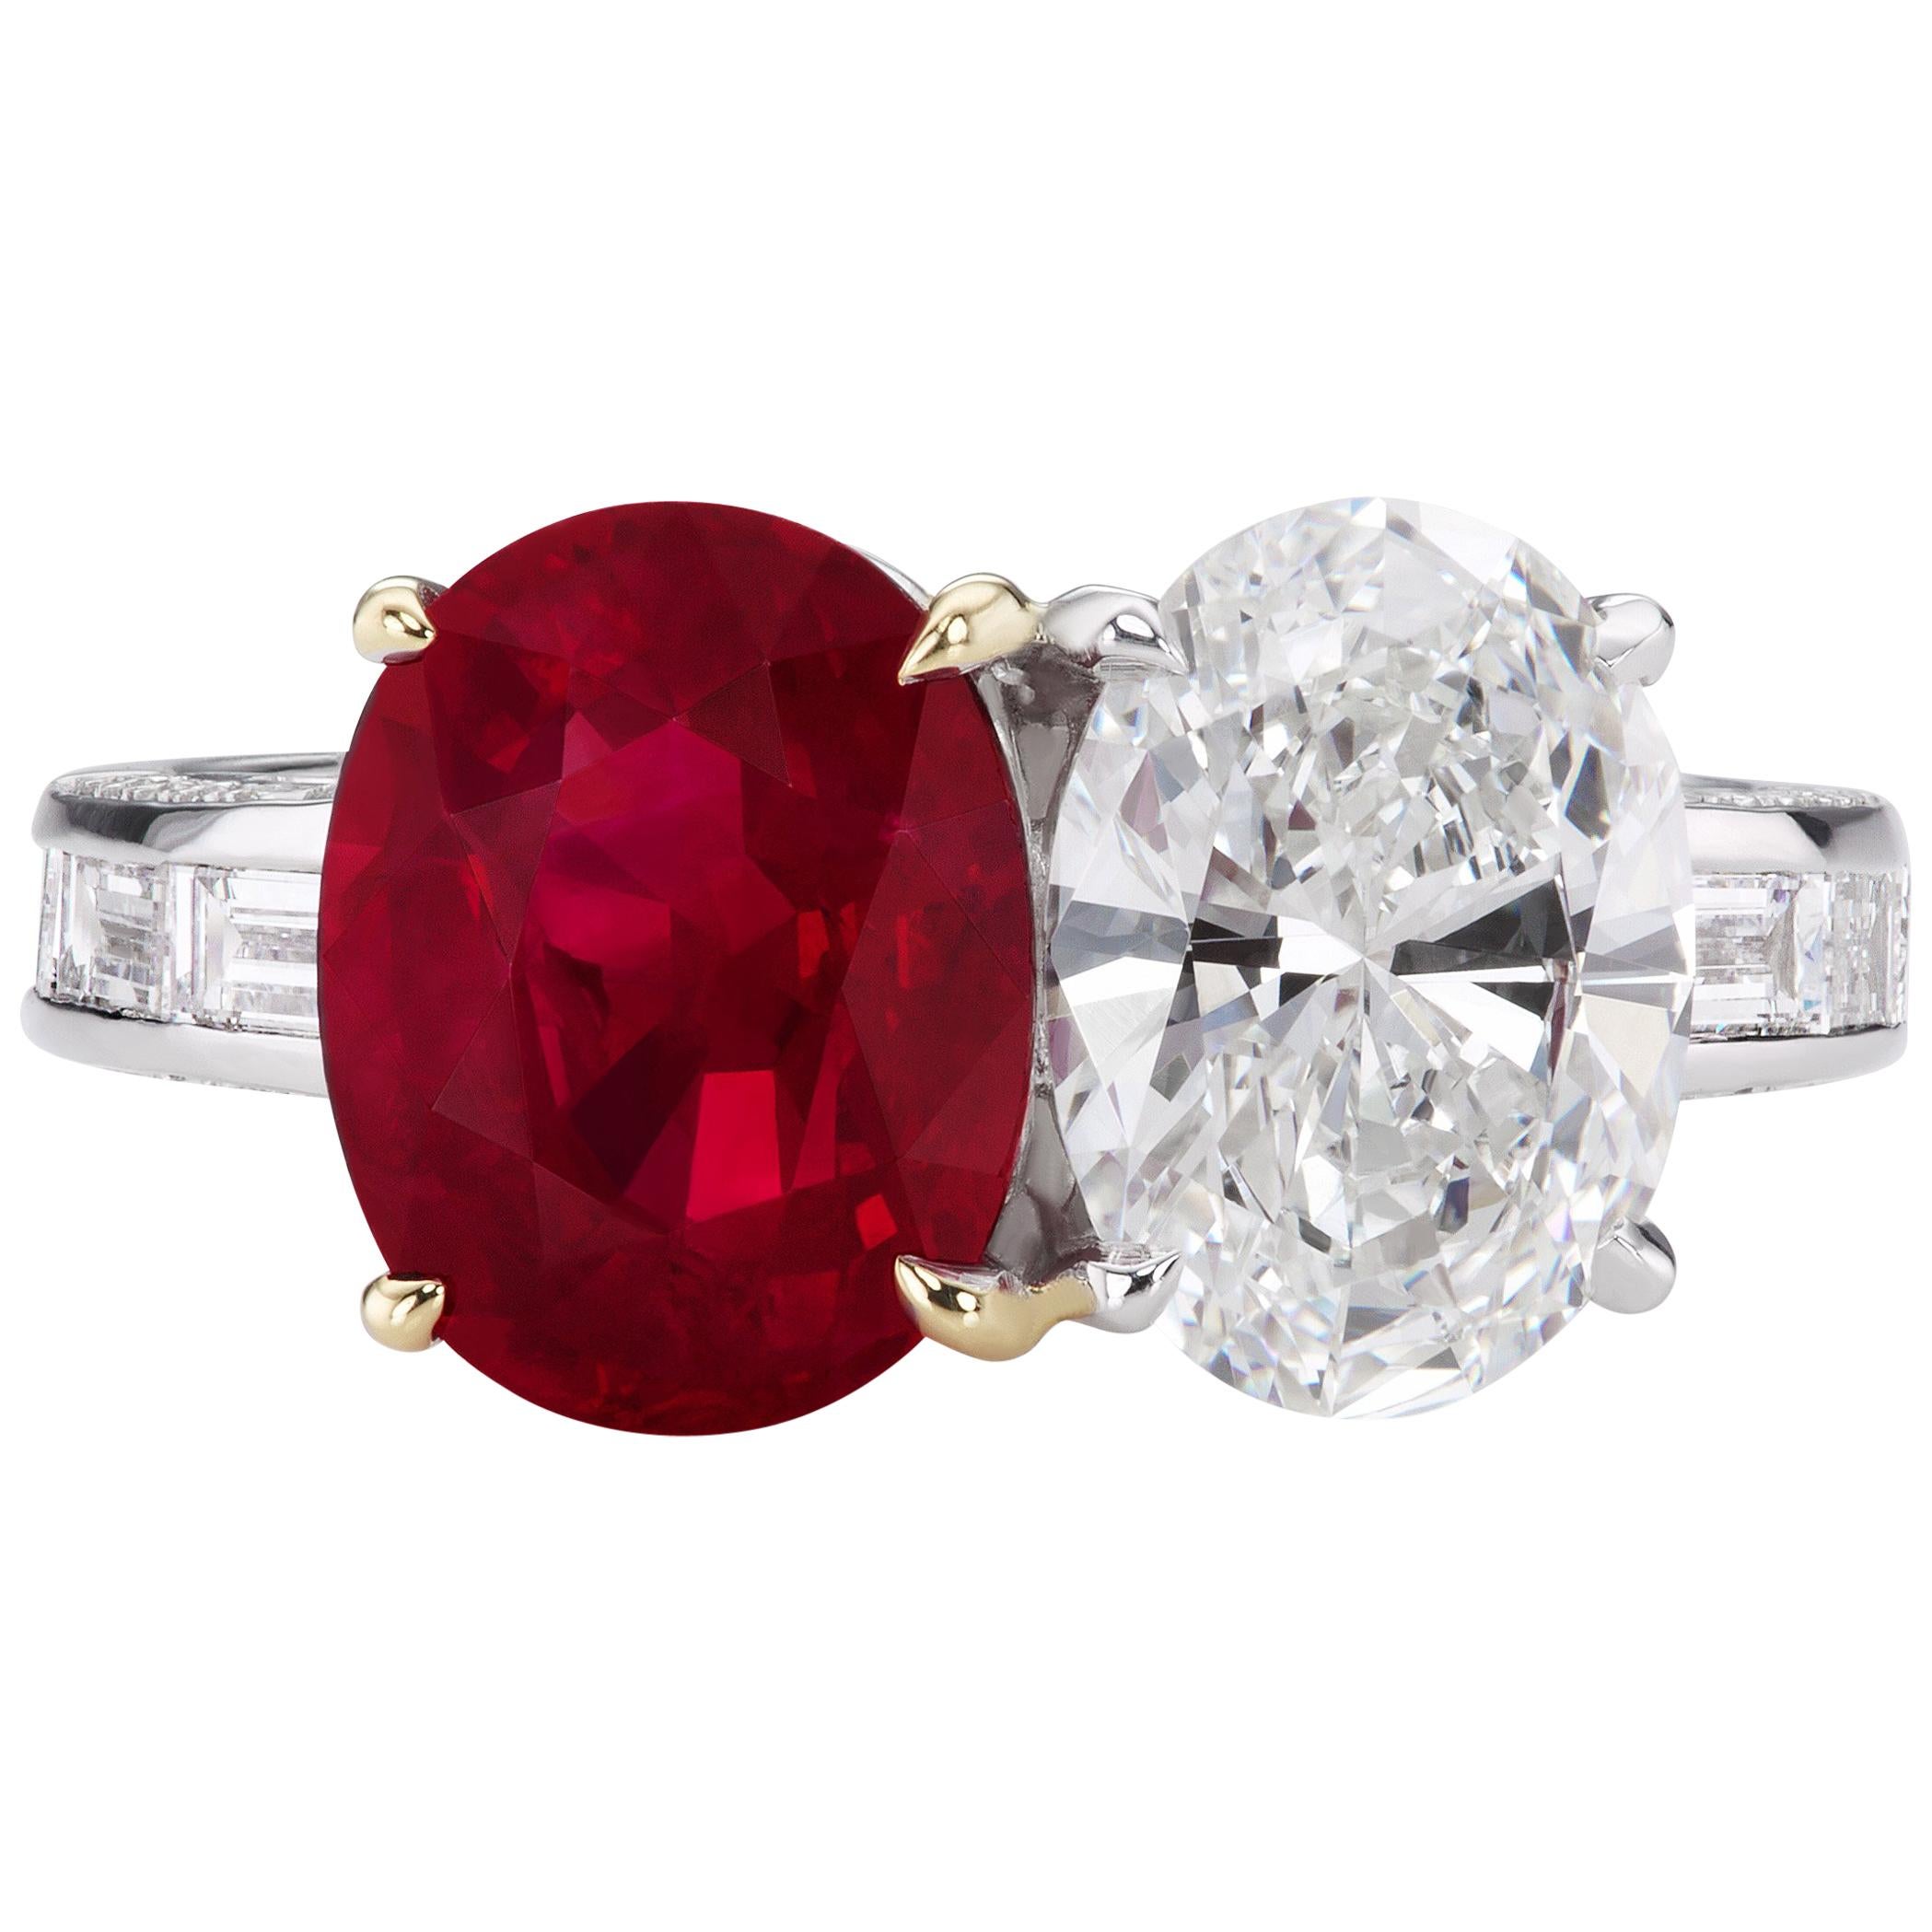 3.61ct Pigeon Blood Burma Ruby with 2.01ct GVS2 Oval GIA Diamond 18k Ring For Sale